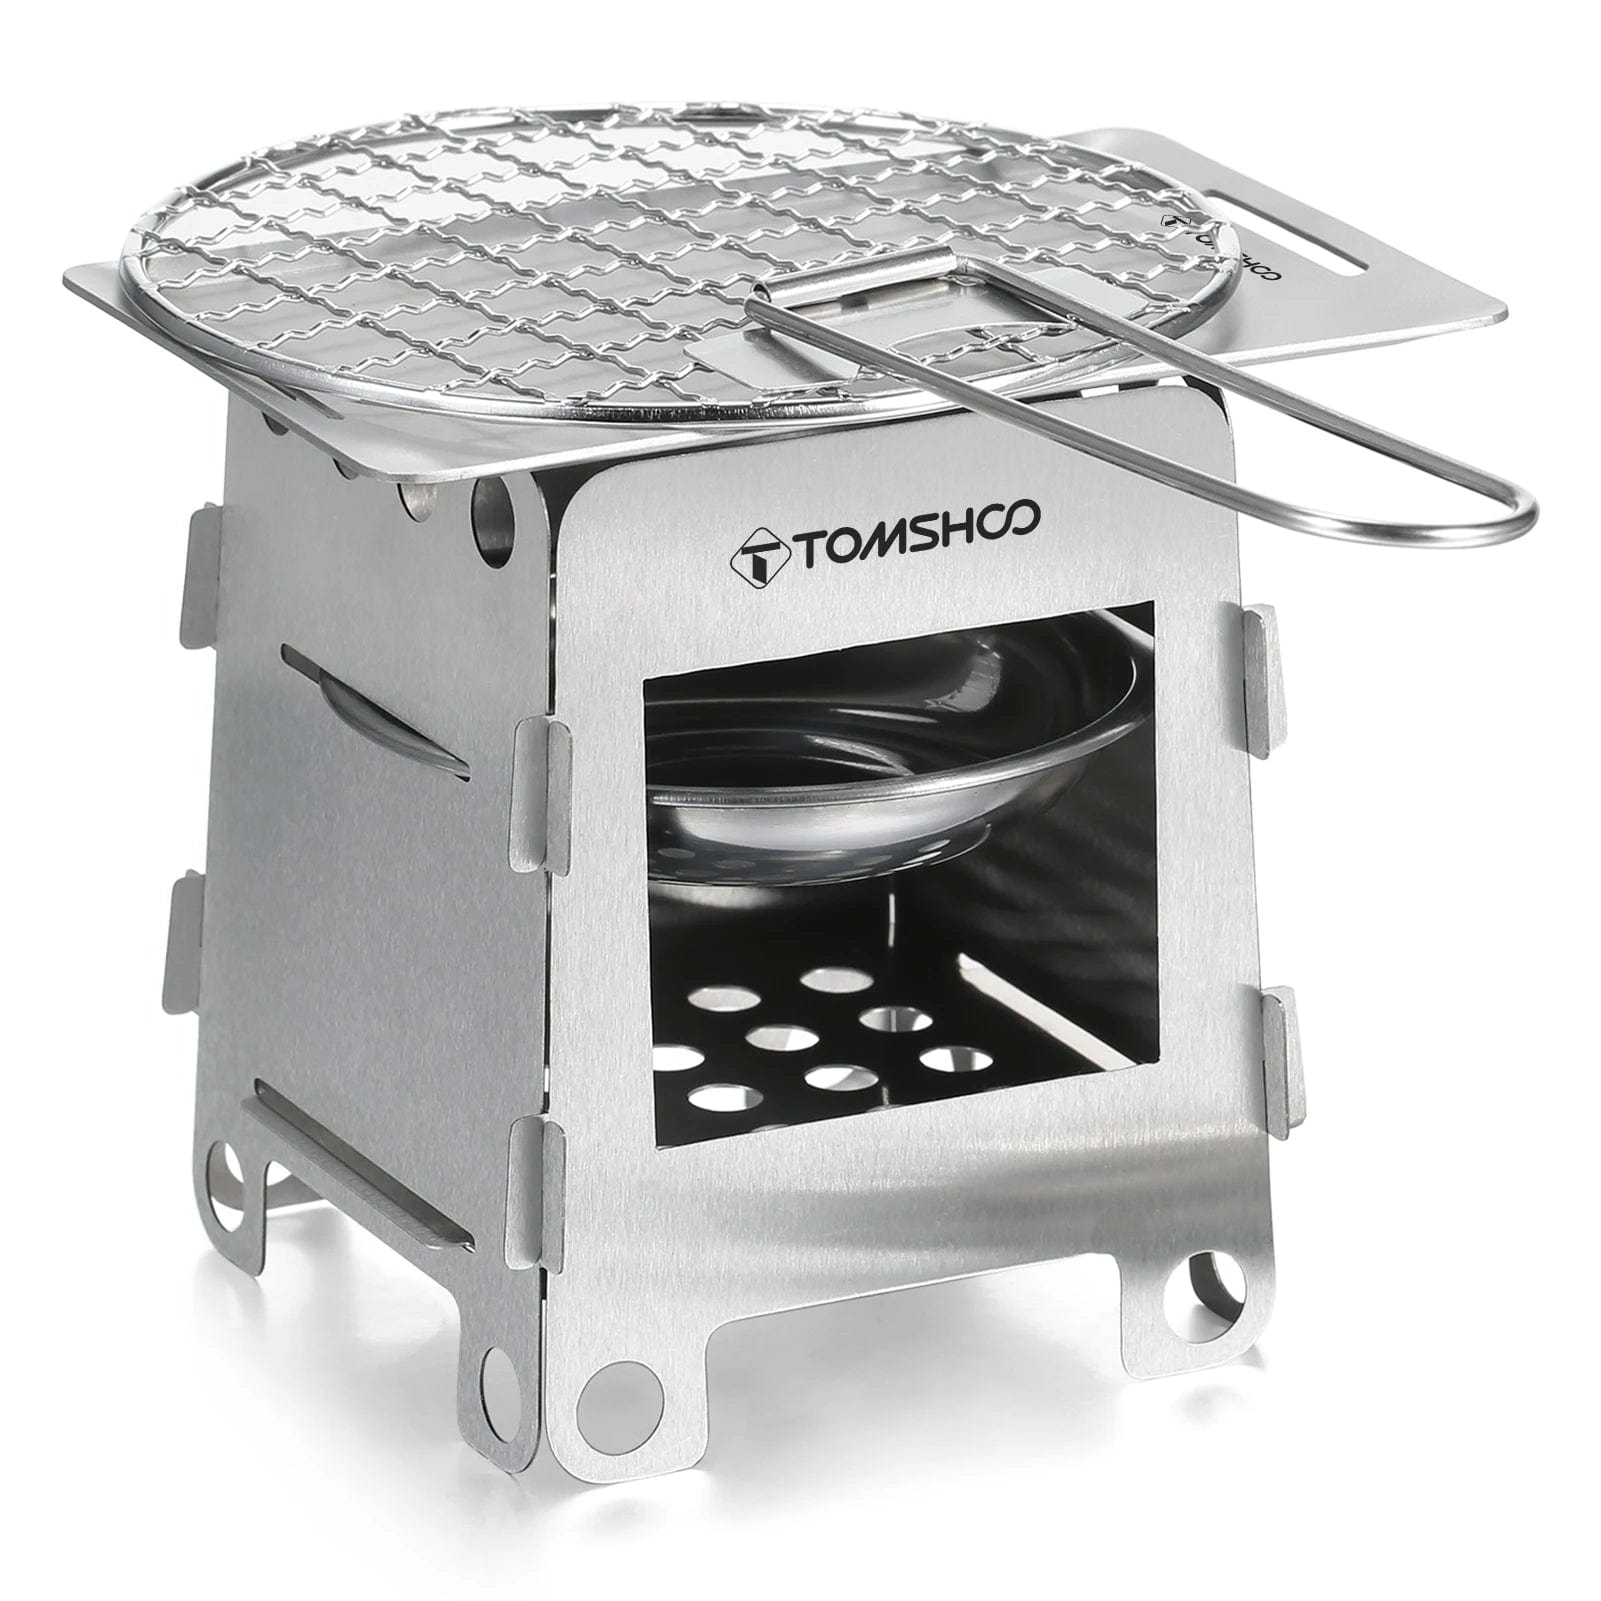 Tomshoo stainless steel folding cooker / outdoor grill